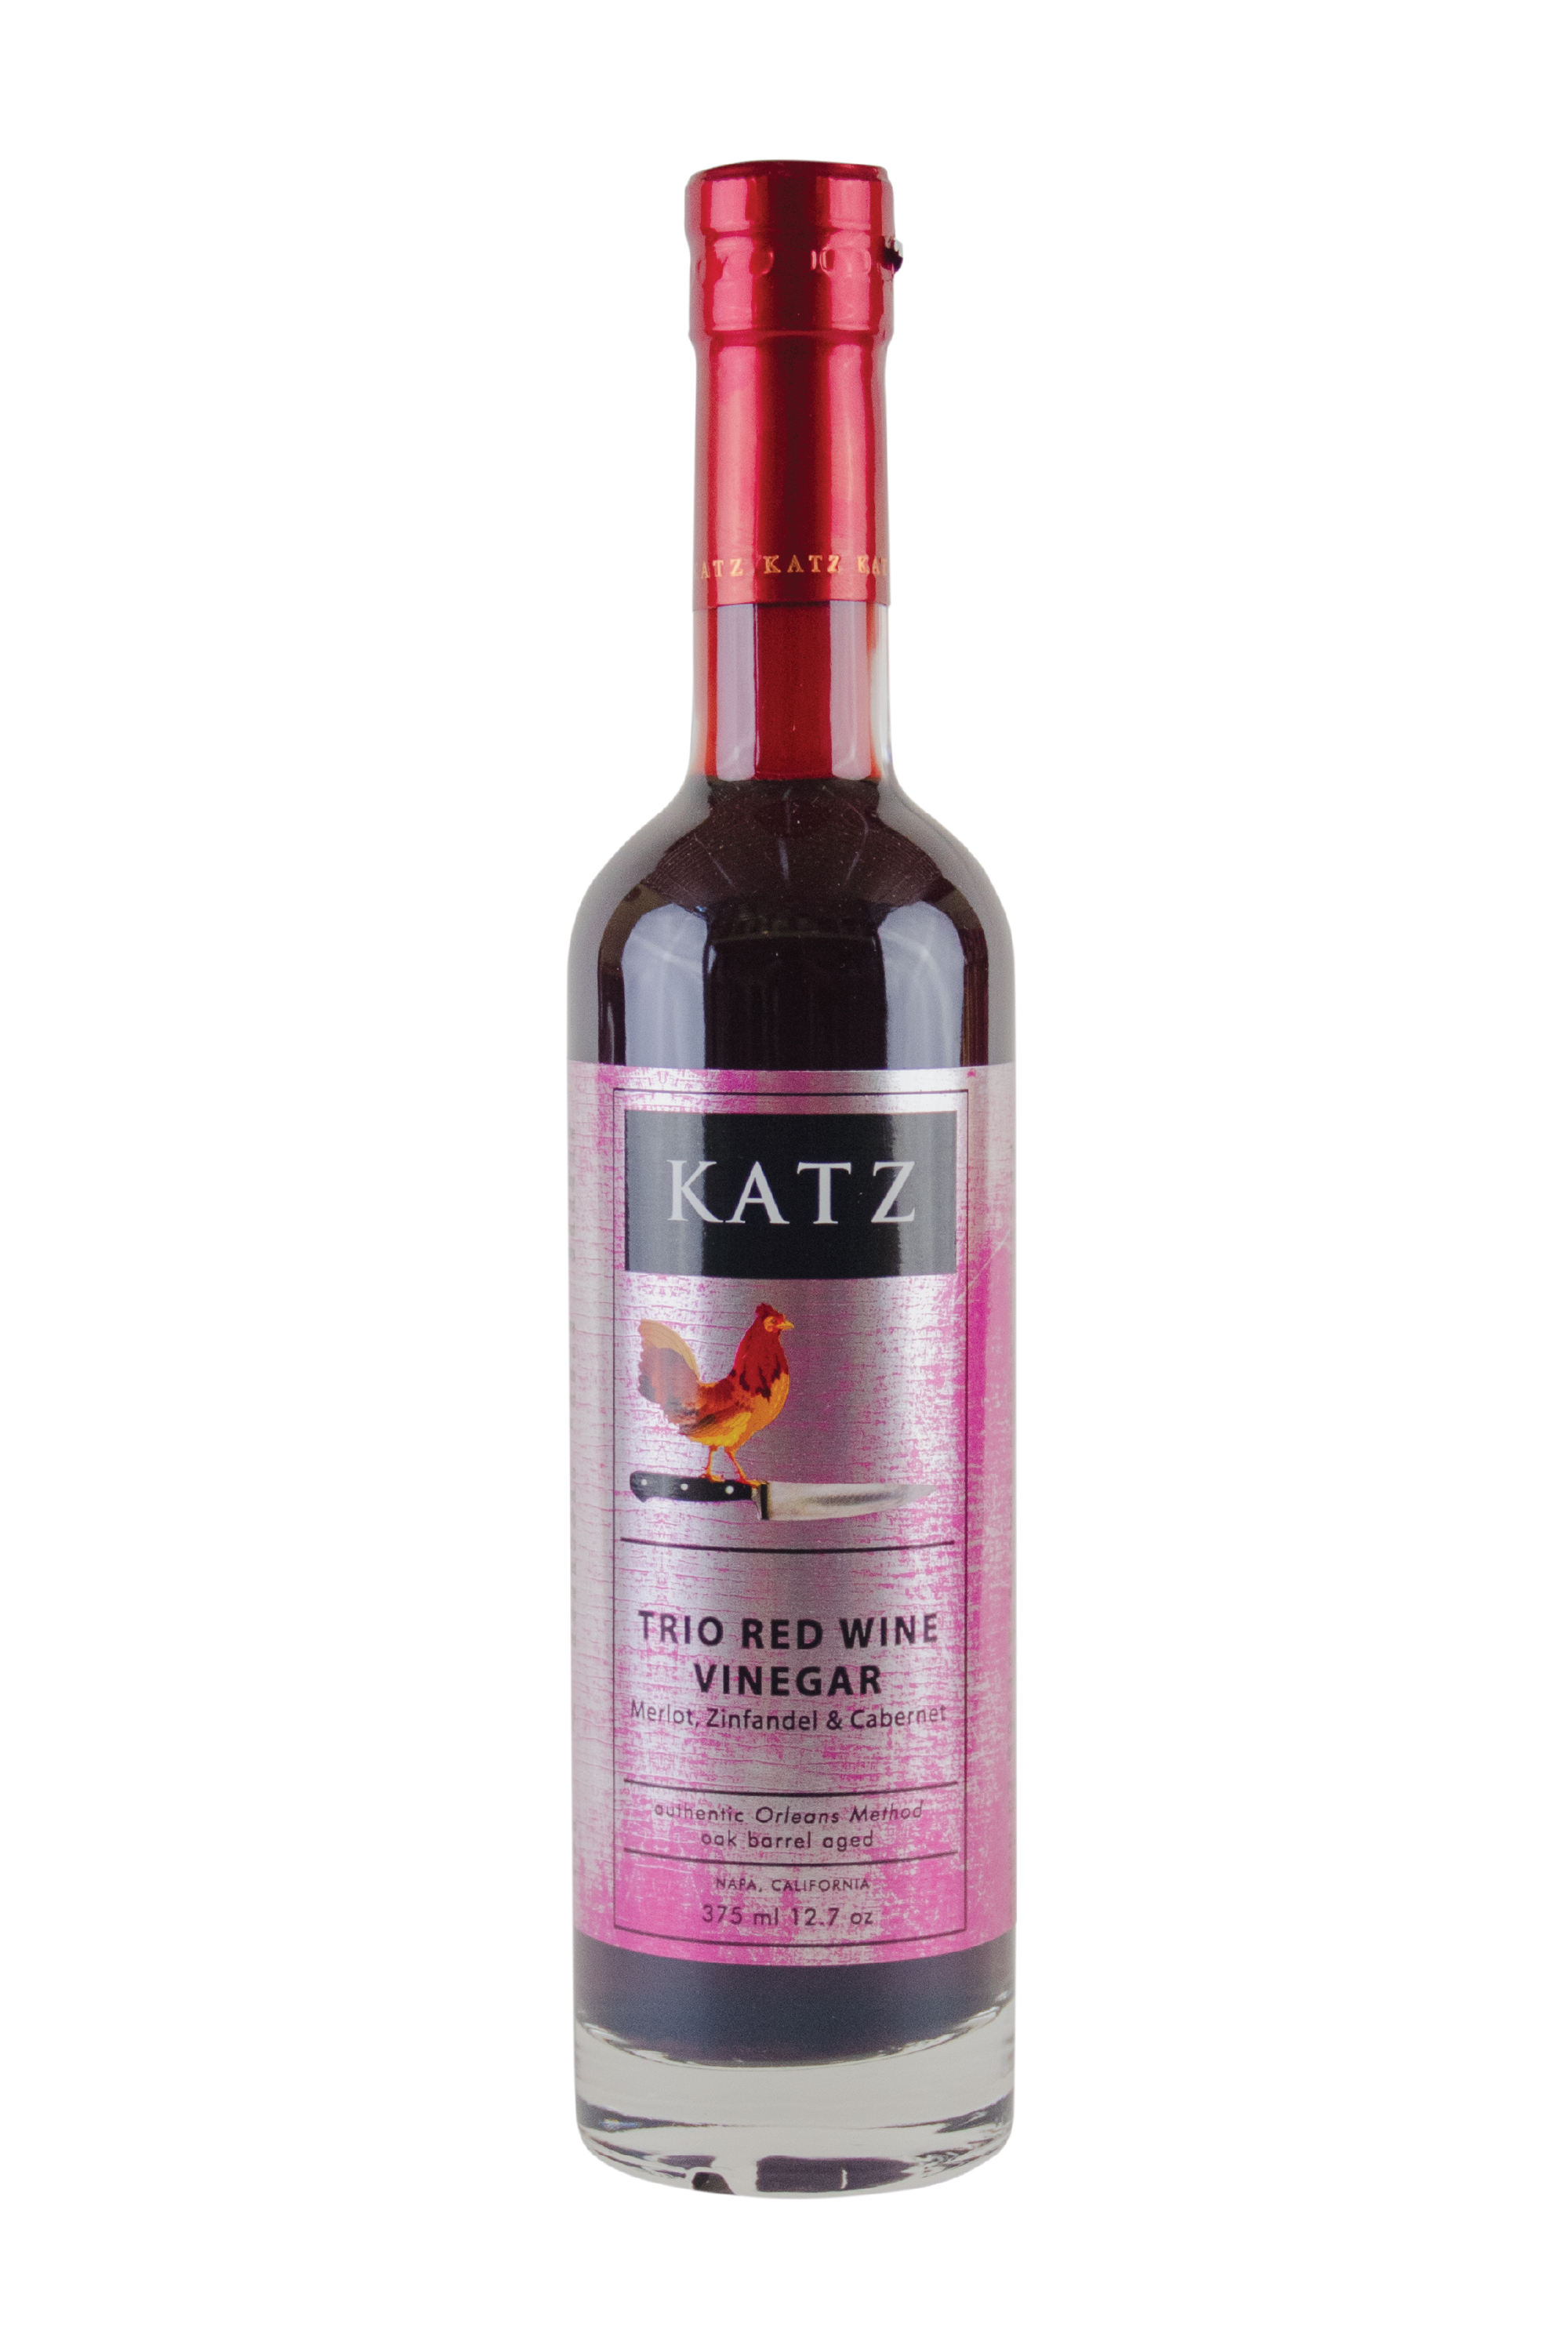 A 375 ml/12.7 oz glass bottle of Katz Trio Red Wine Vinegar (Merlot, Zinfandel & Cabernet) on a white background. Label is metallic white and pink, with a black Katz logo and the image of a rooster standing on the hilt of a chef's knife and the words, "Authentic Orleans Method, oak barrel aged" and "Napa, California" on the bottle. Vinegar is a very dark red, visible through the clear glass bottle with red foil shrink wrap on the top with the word "Katz" printed around the circumference.